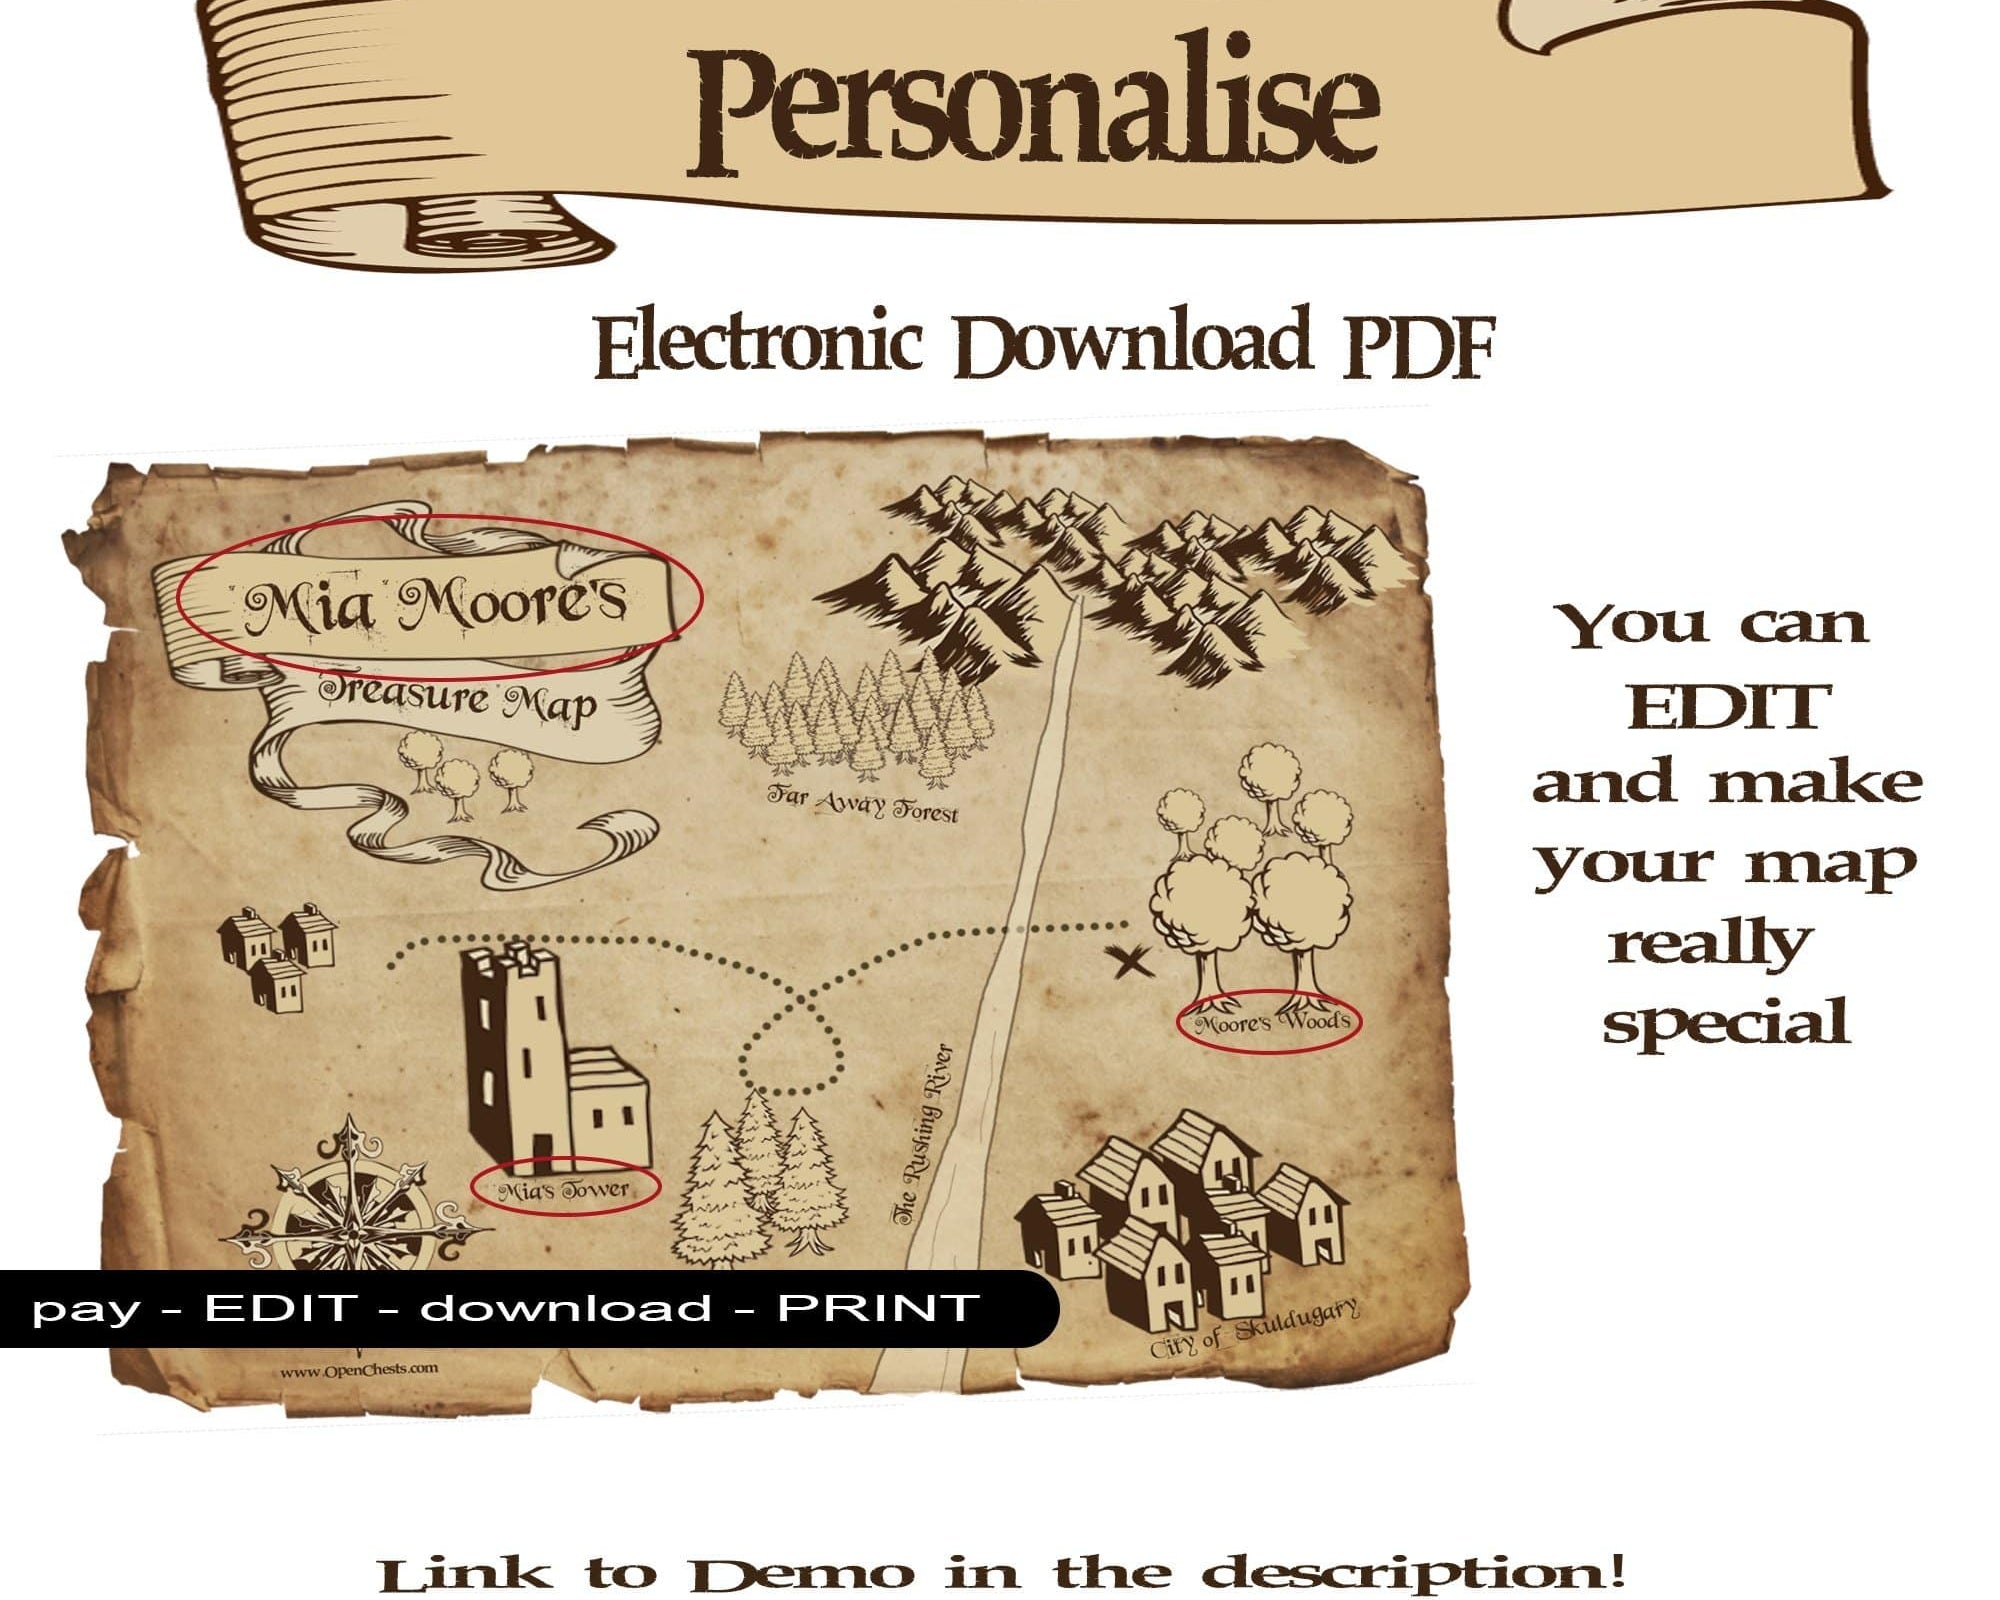 Pirate Map Printable PDF - Customisable download - Open Chests